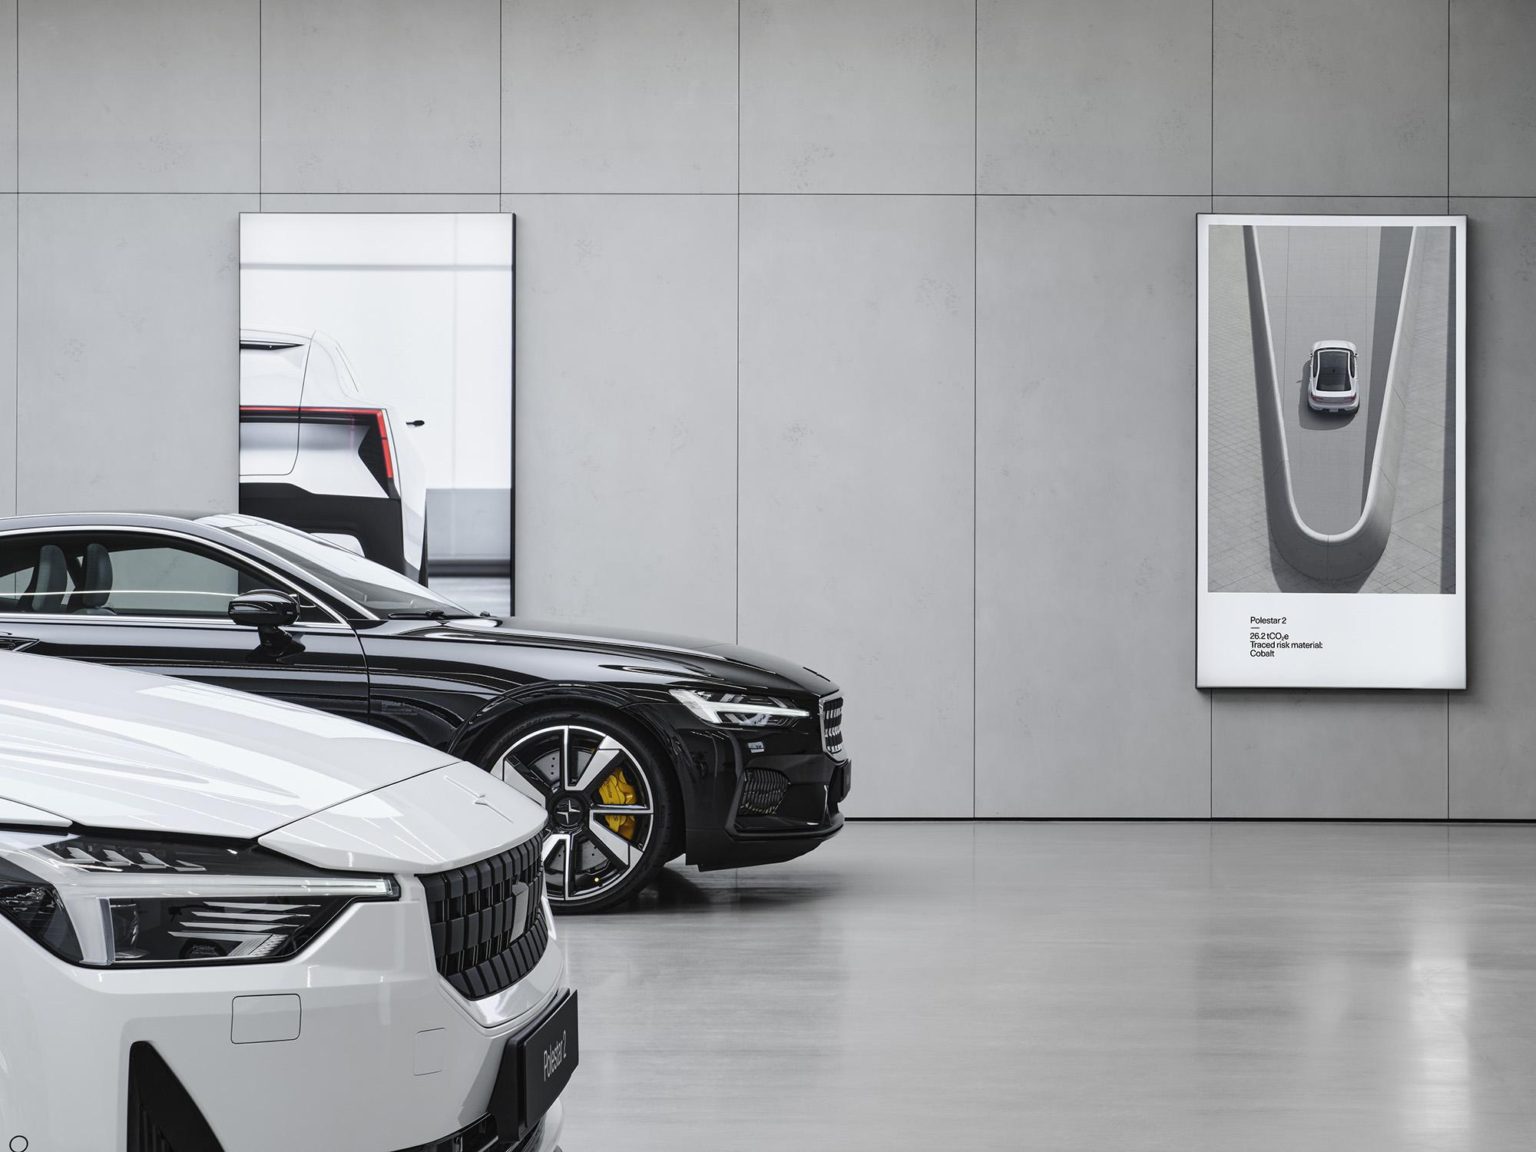 Polestar is committing to letting customers know how sustainable its cars are.